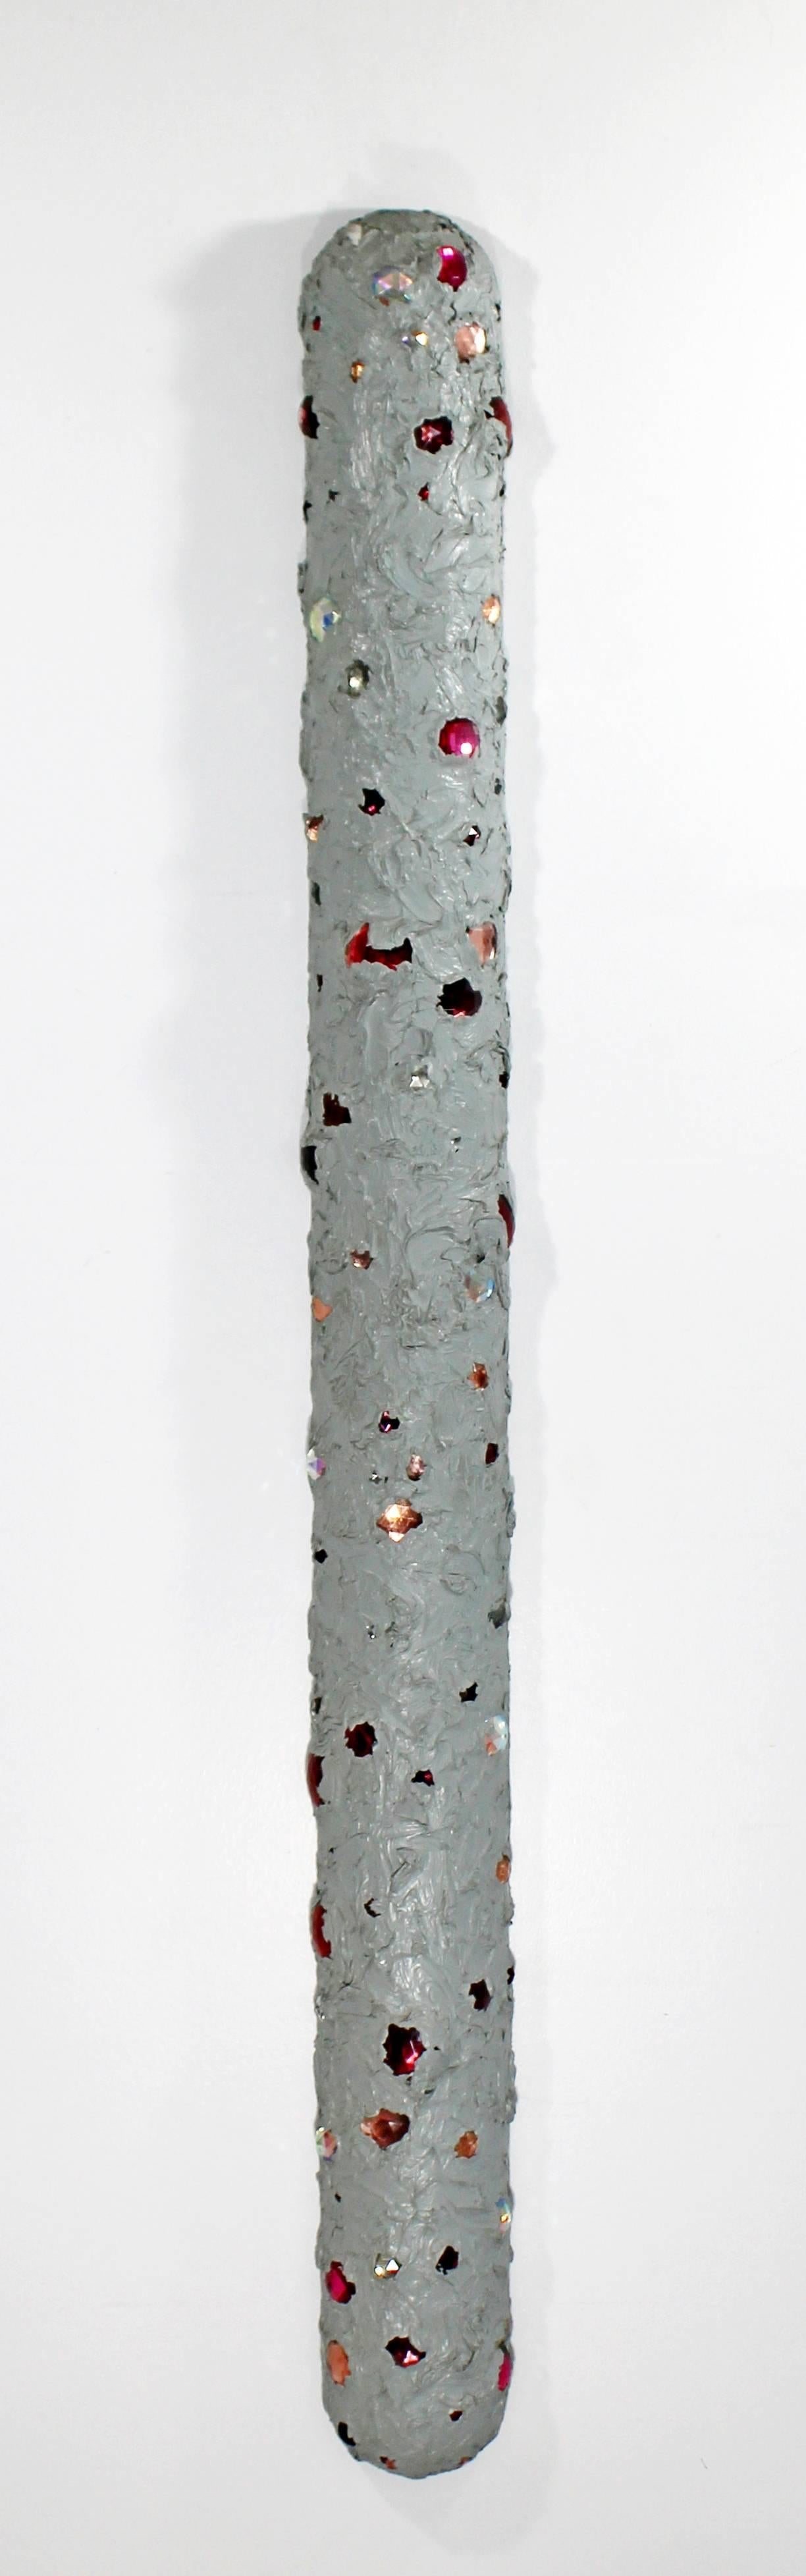 For your consideration is an untitled, hanging wall sculpture, made of grey oil with glass jewels on wood, by John Torreano in 1975. In excellent condition. The dimensions are 4